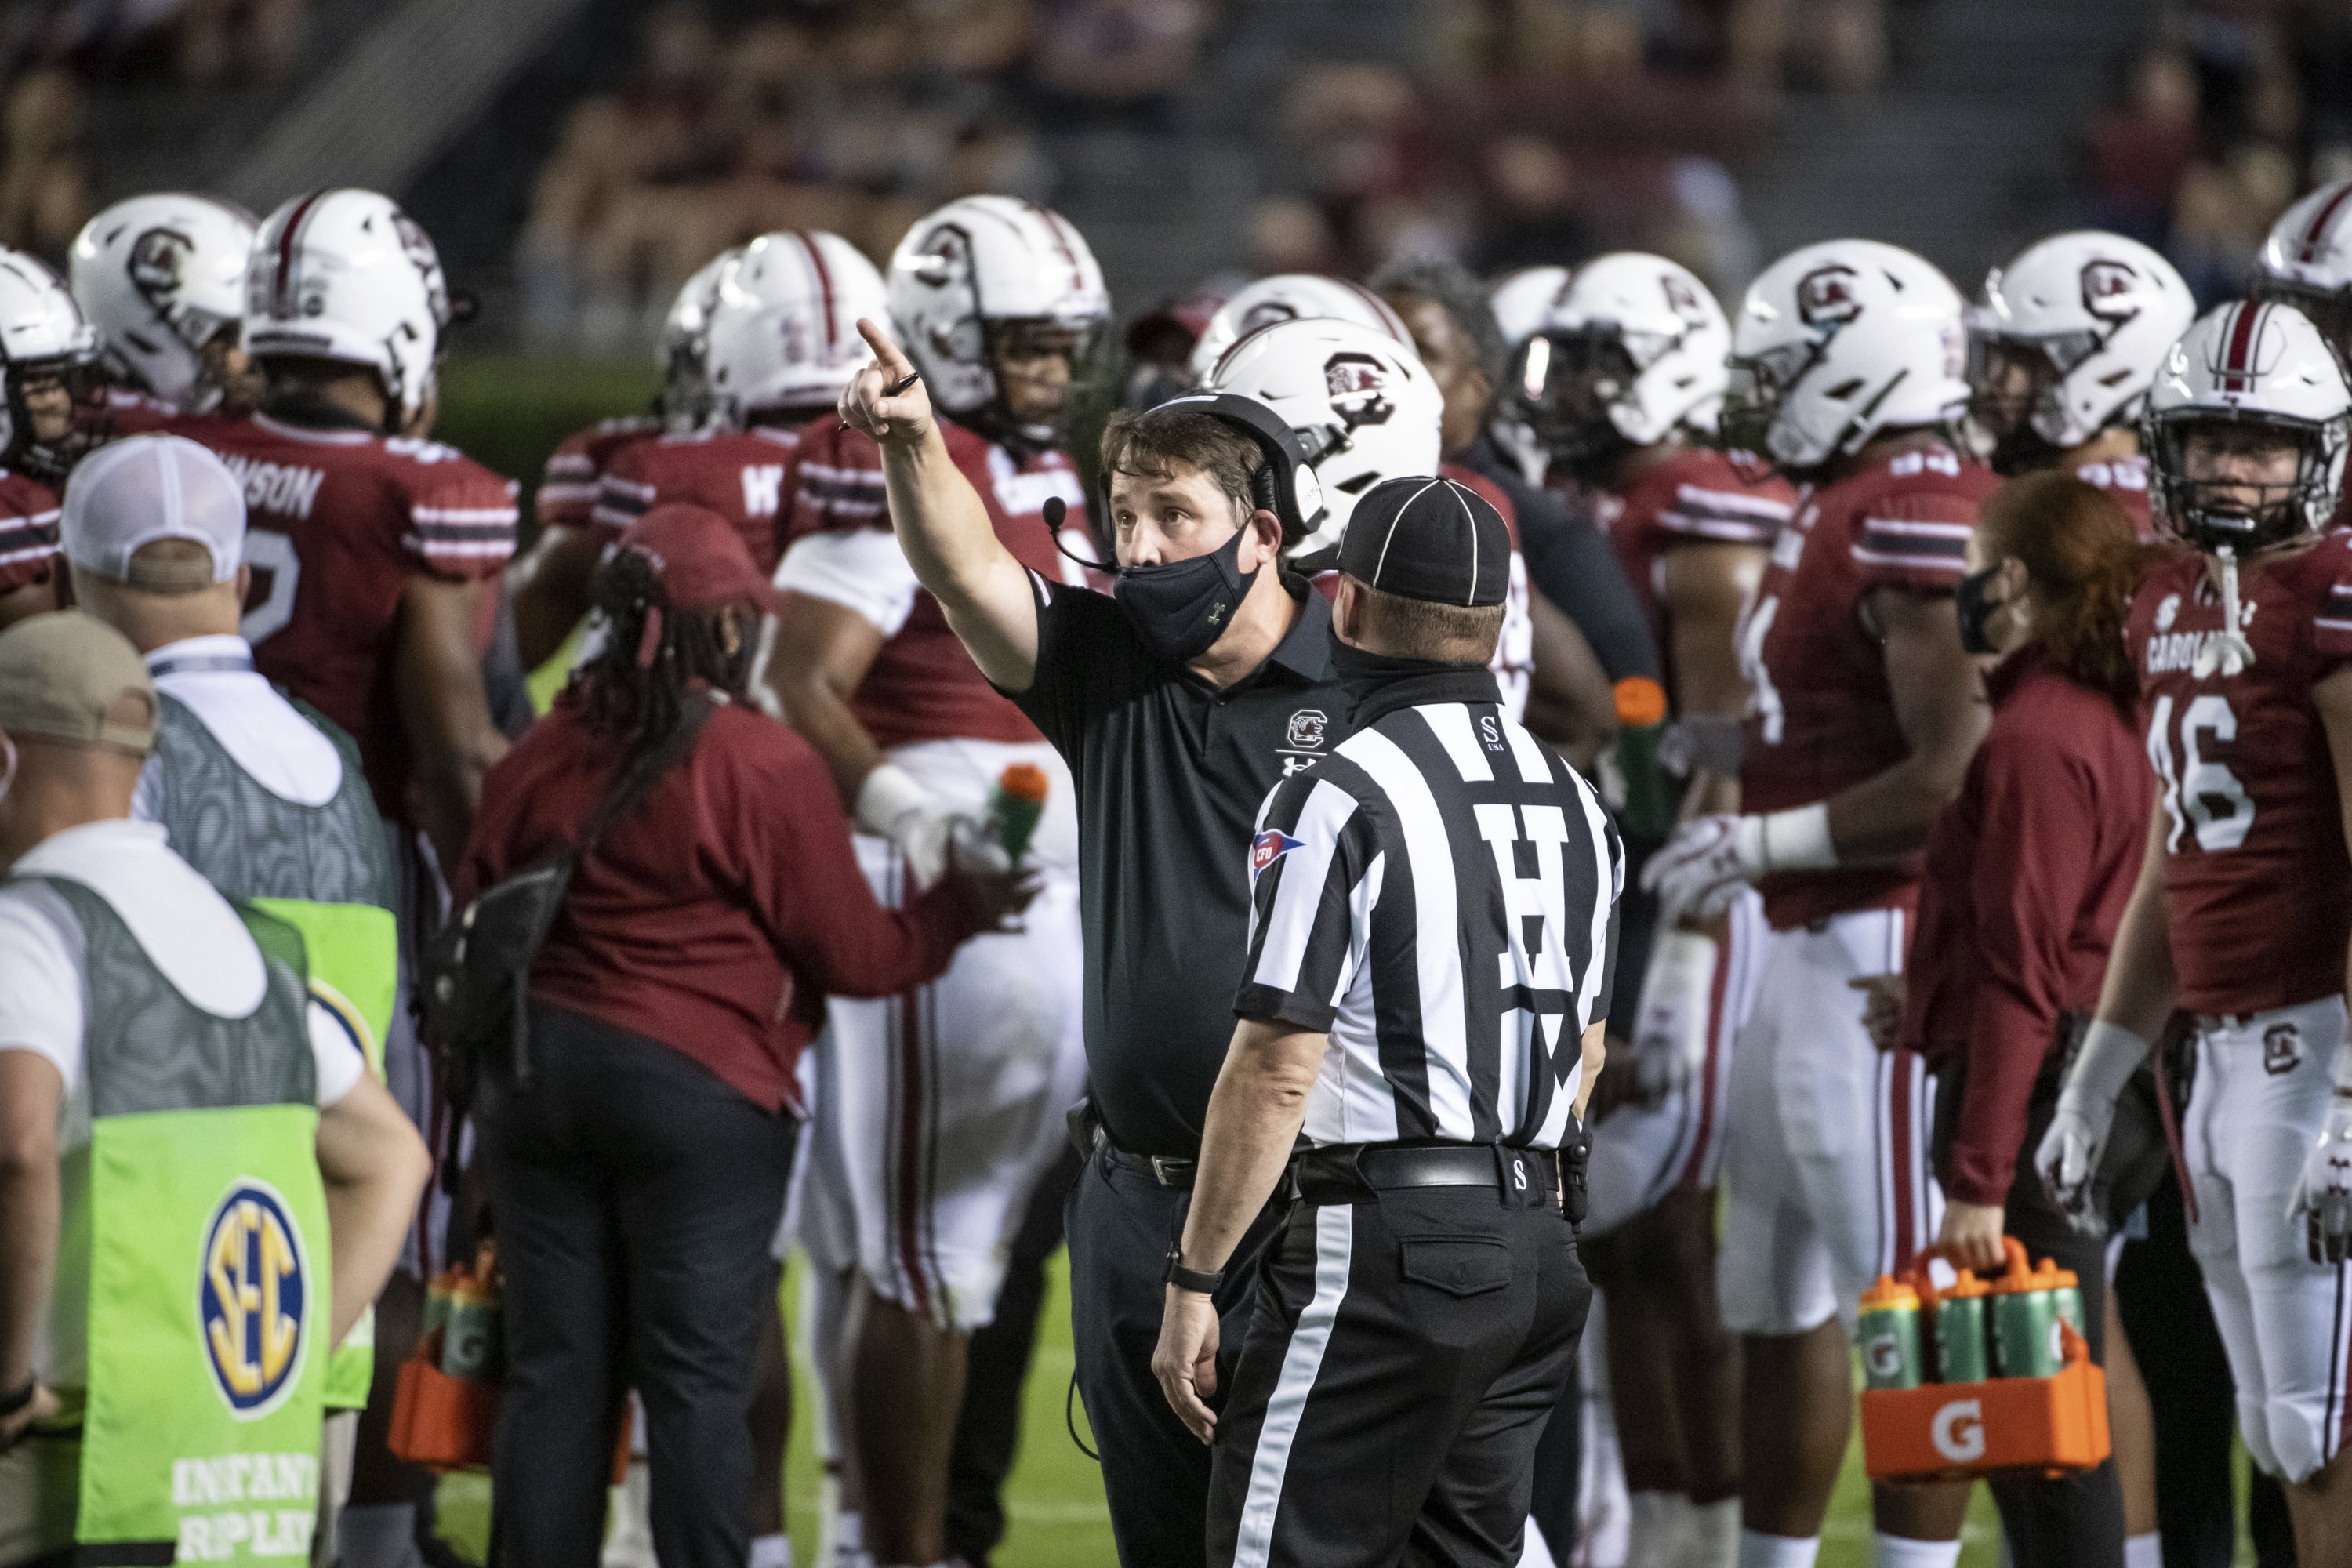 South Carolina players opt out, others out with injuries AP News